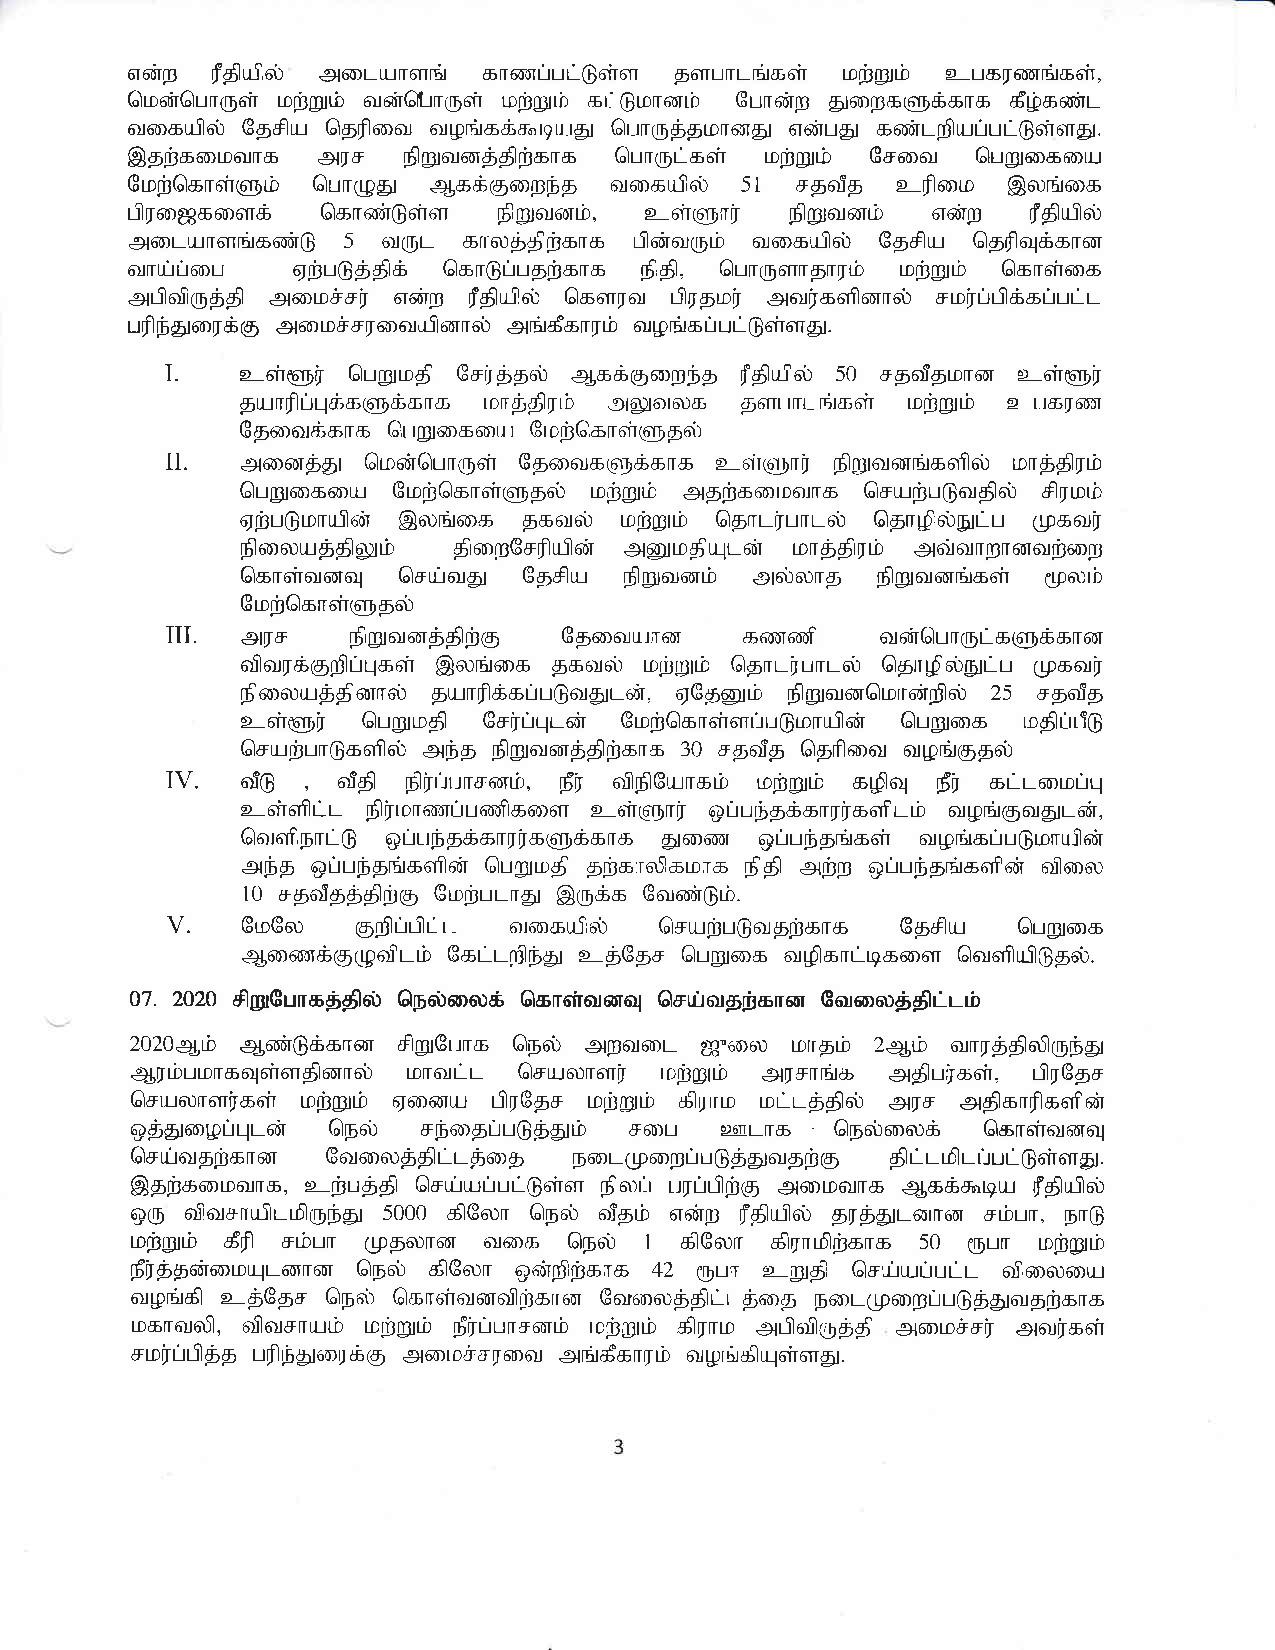 Cabinet Decision on 15.07.2020 Tamil page 003